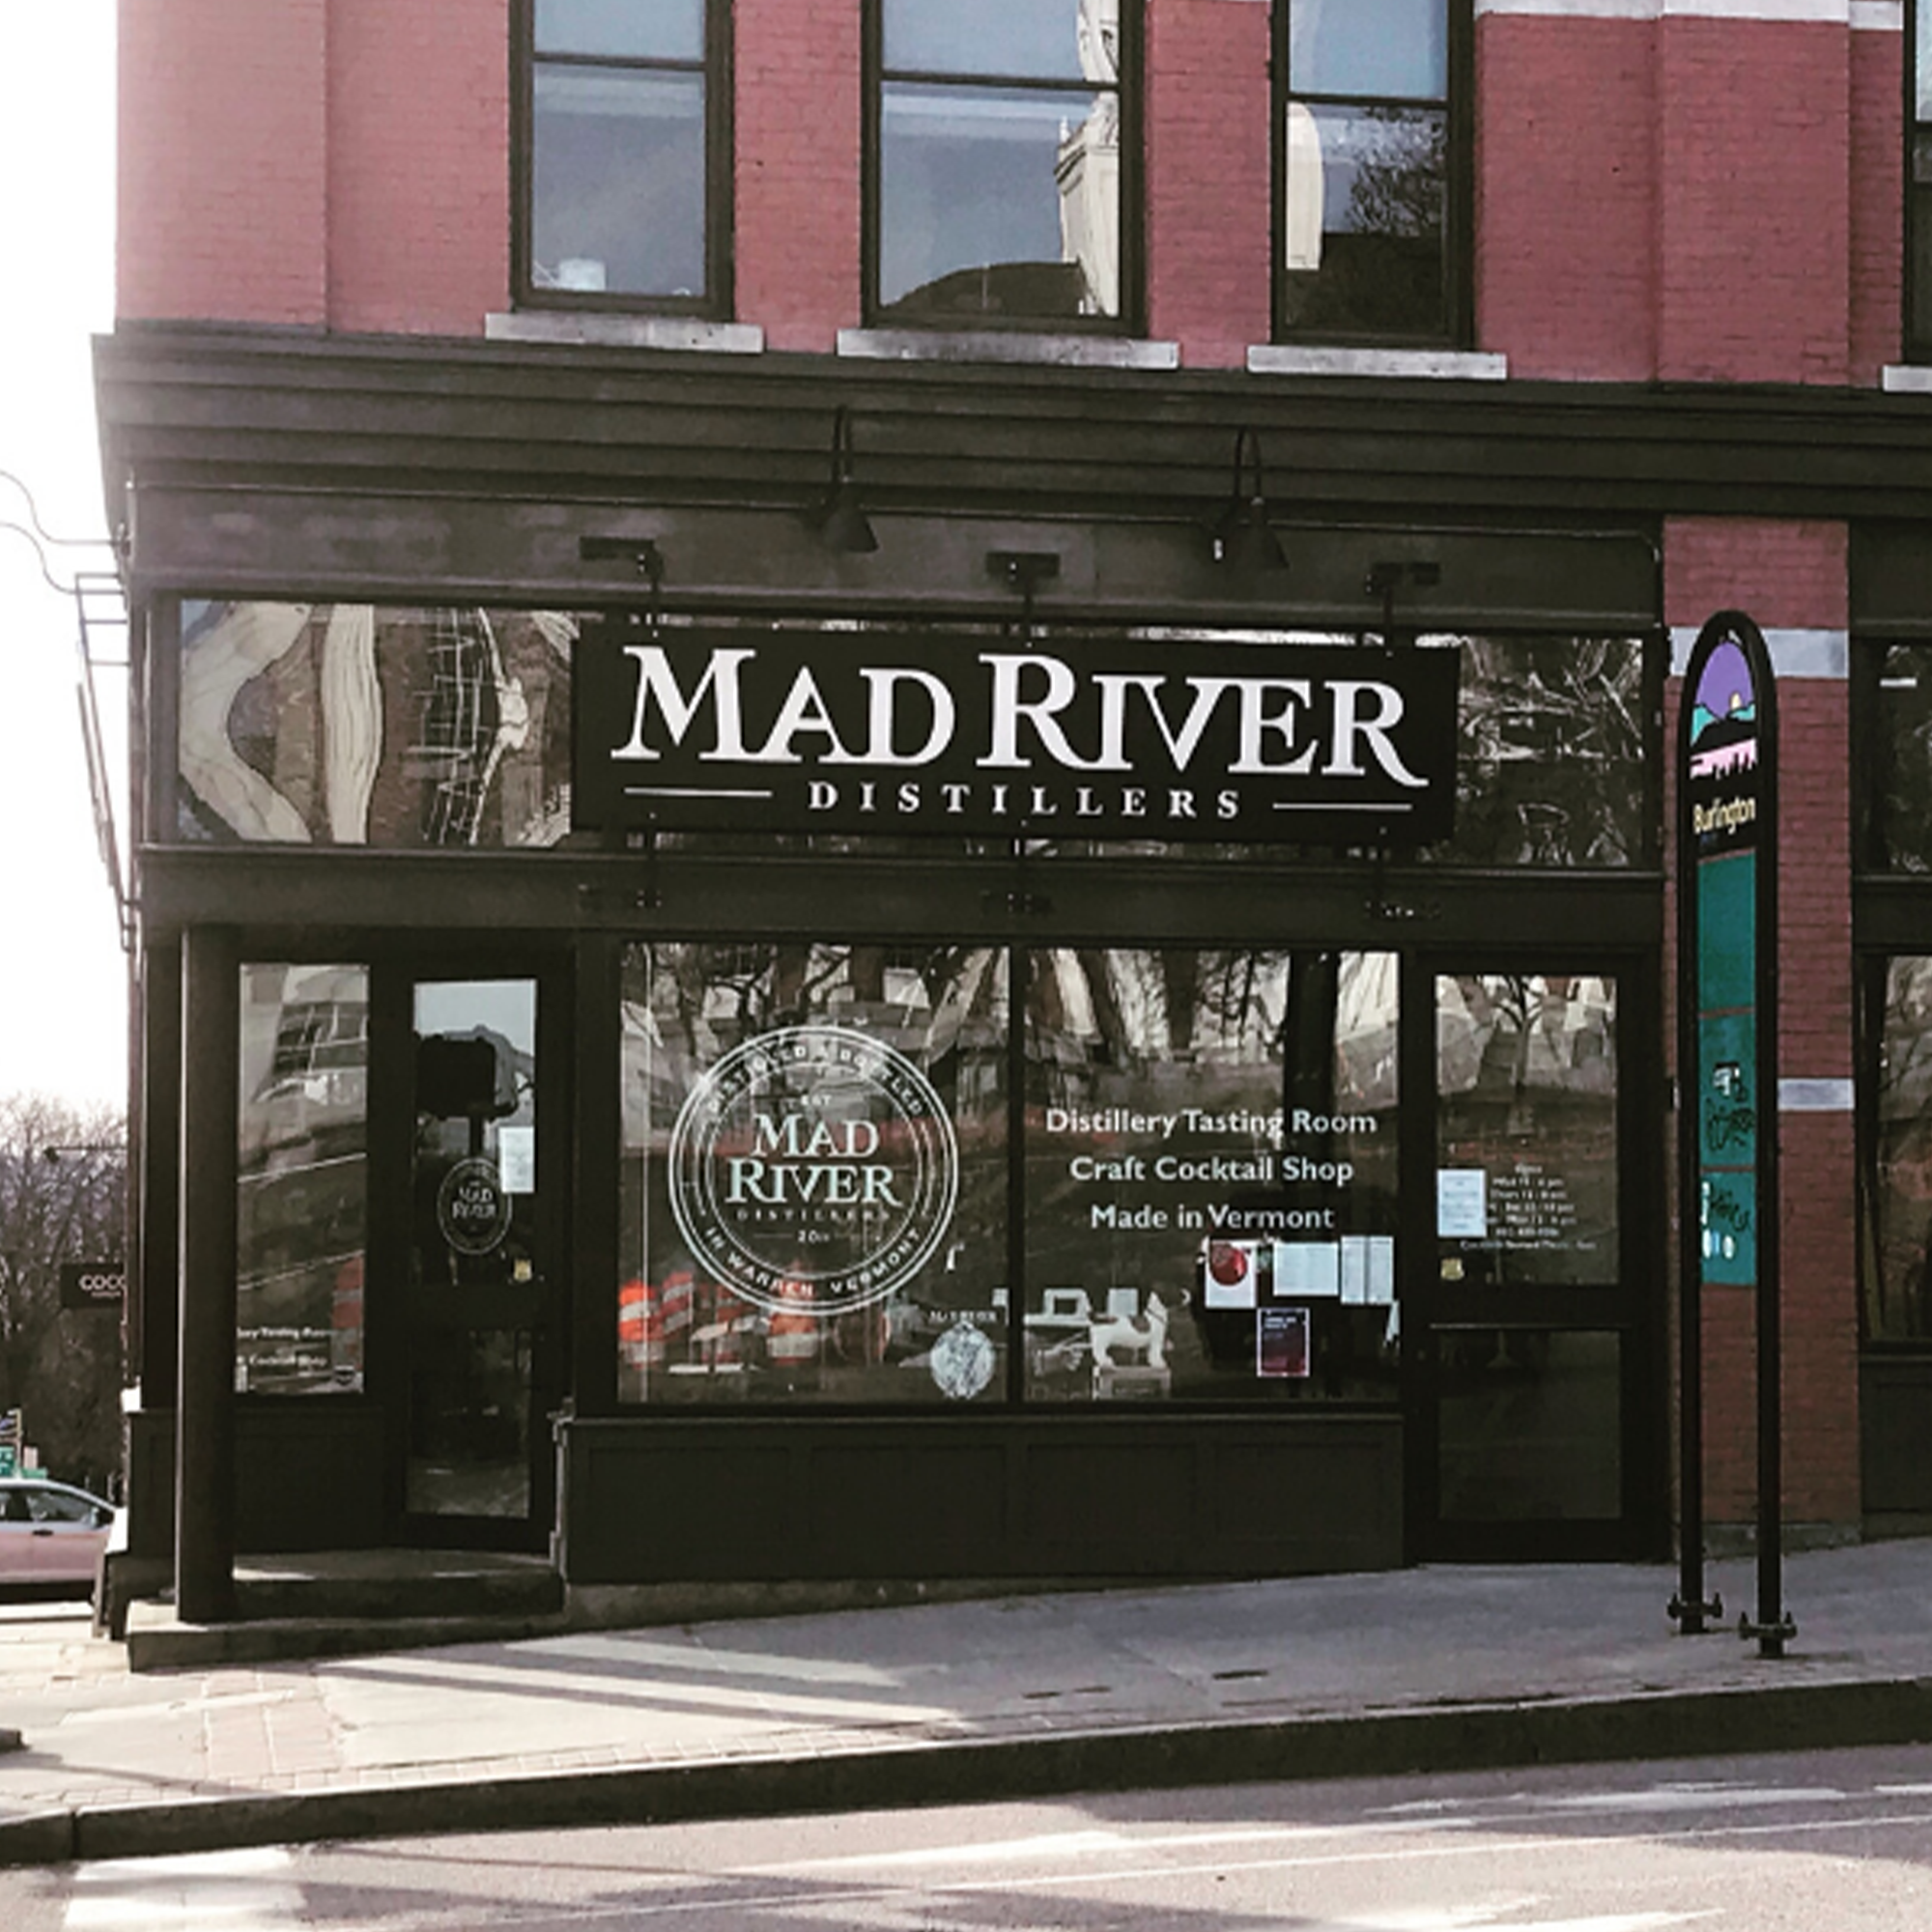 Mad River First Run Rum